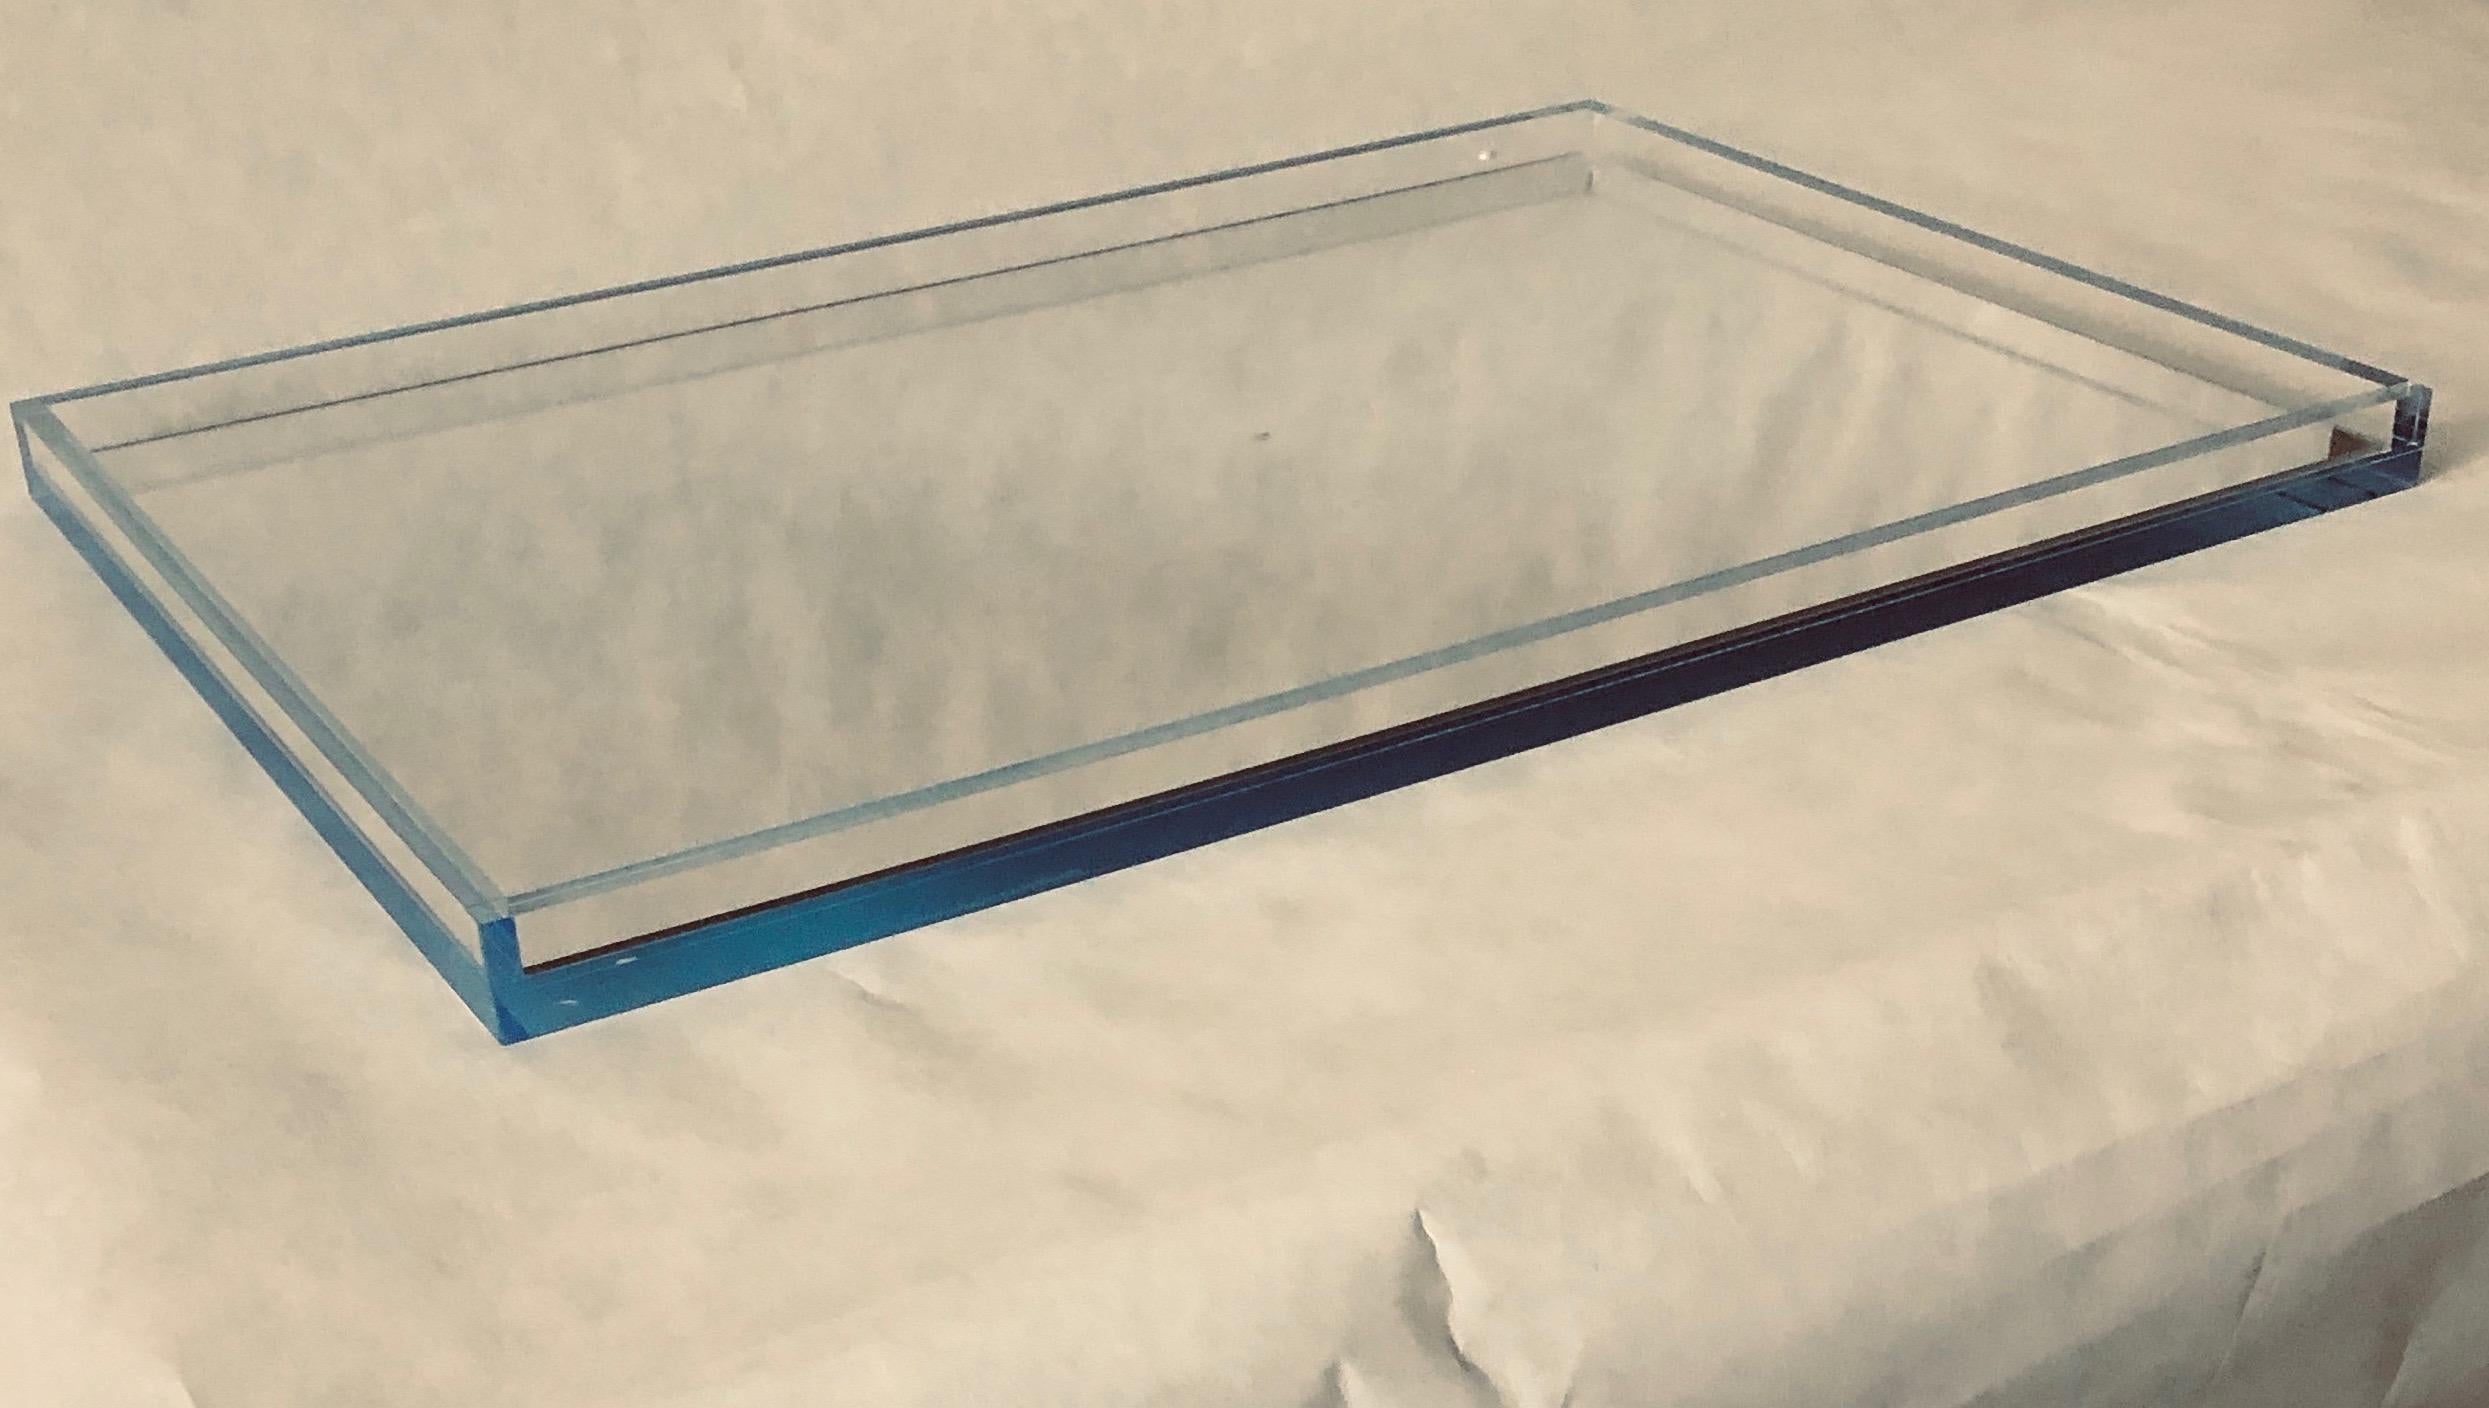 Post-Modern Clear Lucite with Imbedded Blue Border and Mirror Base Decorative Serving Tray